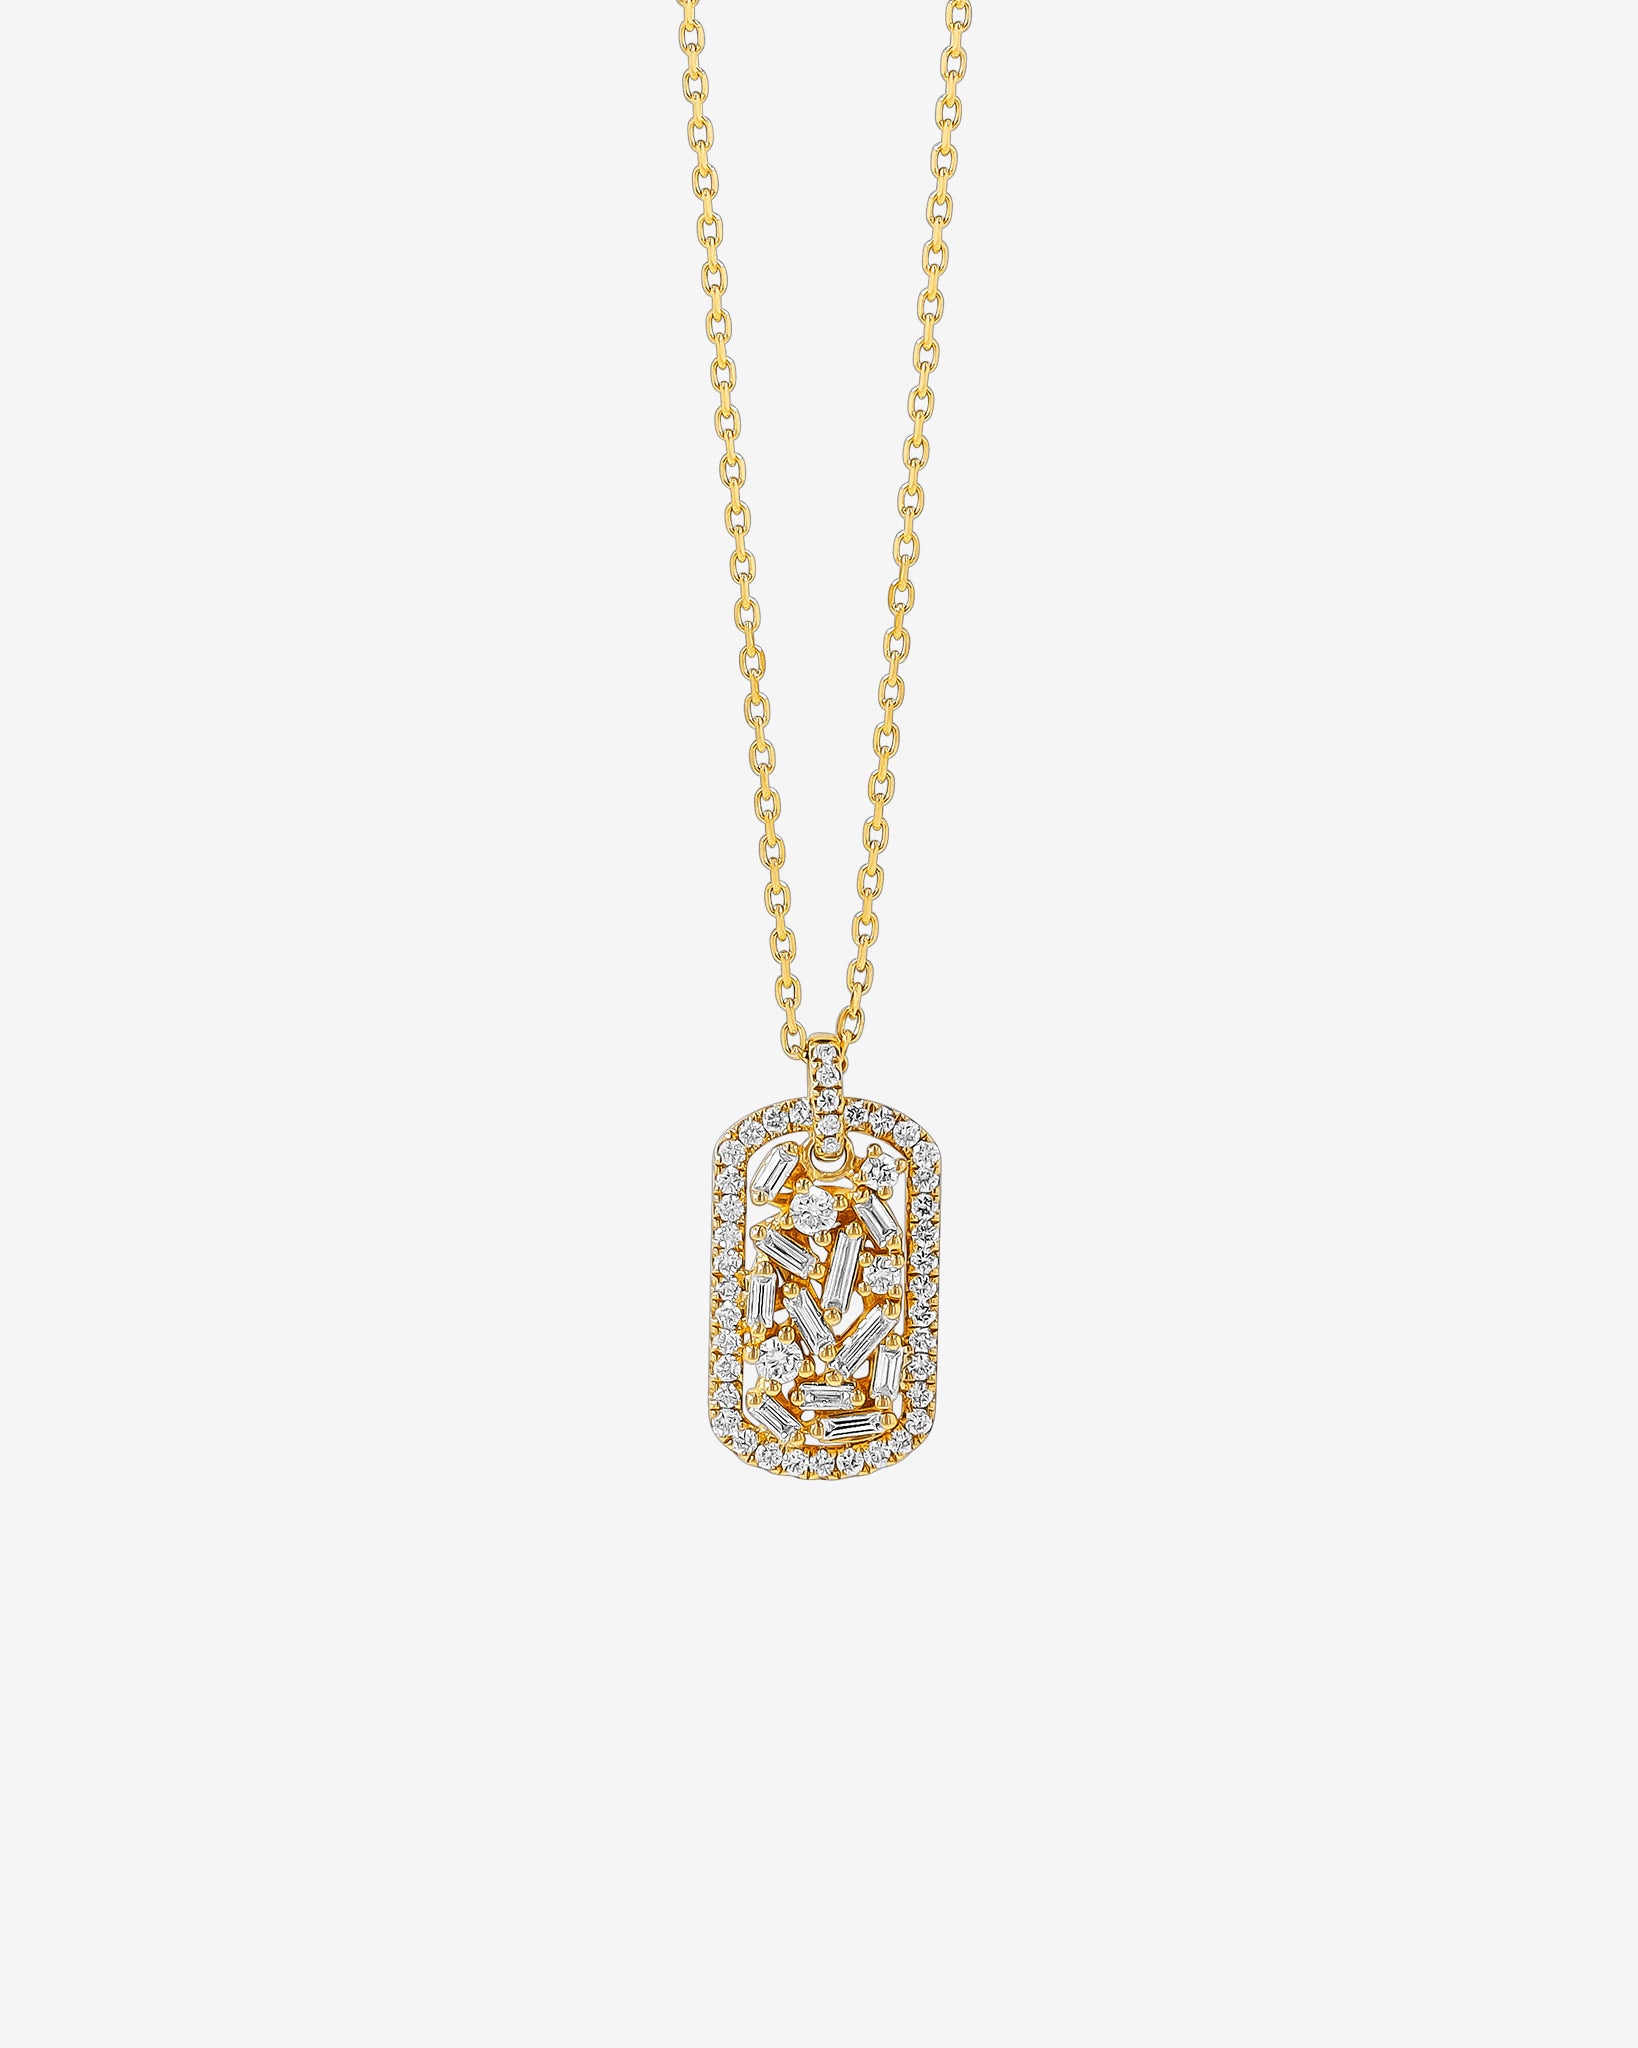 Suzanne Kalan Classic Diamond Small Dog Tag Necklace in 18k yellow gold